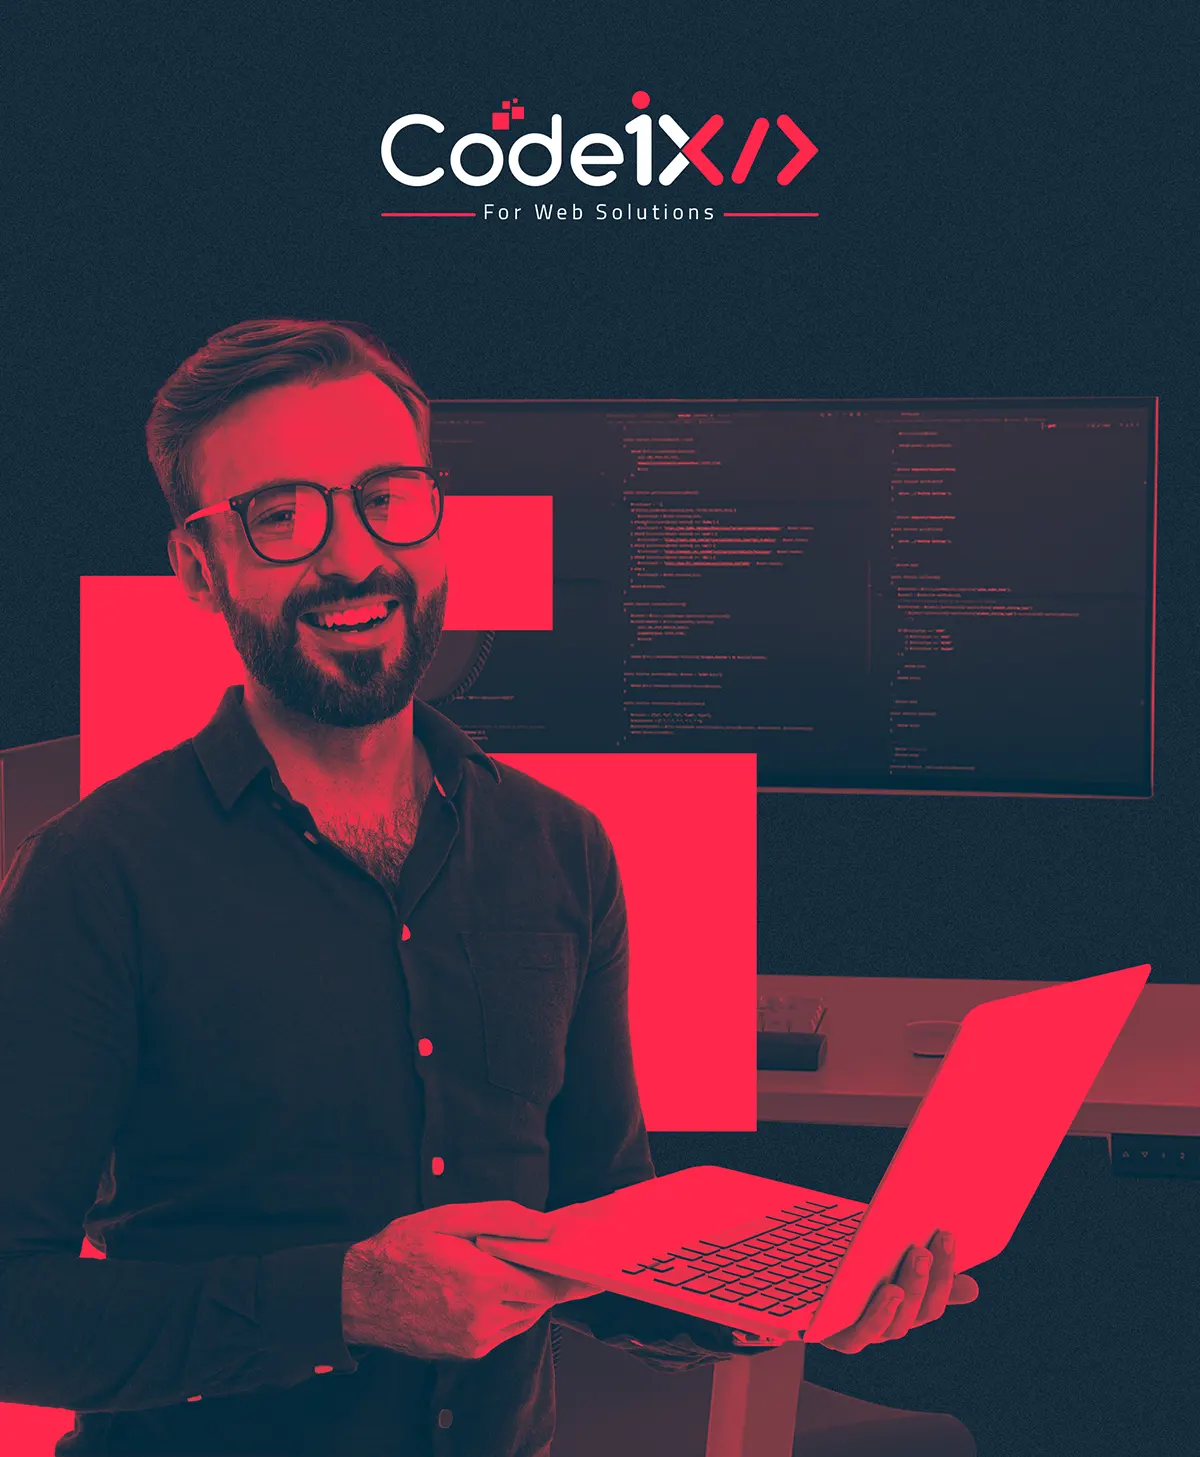 About Code1x